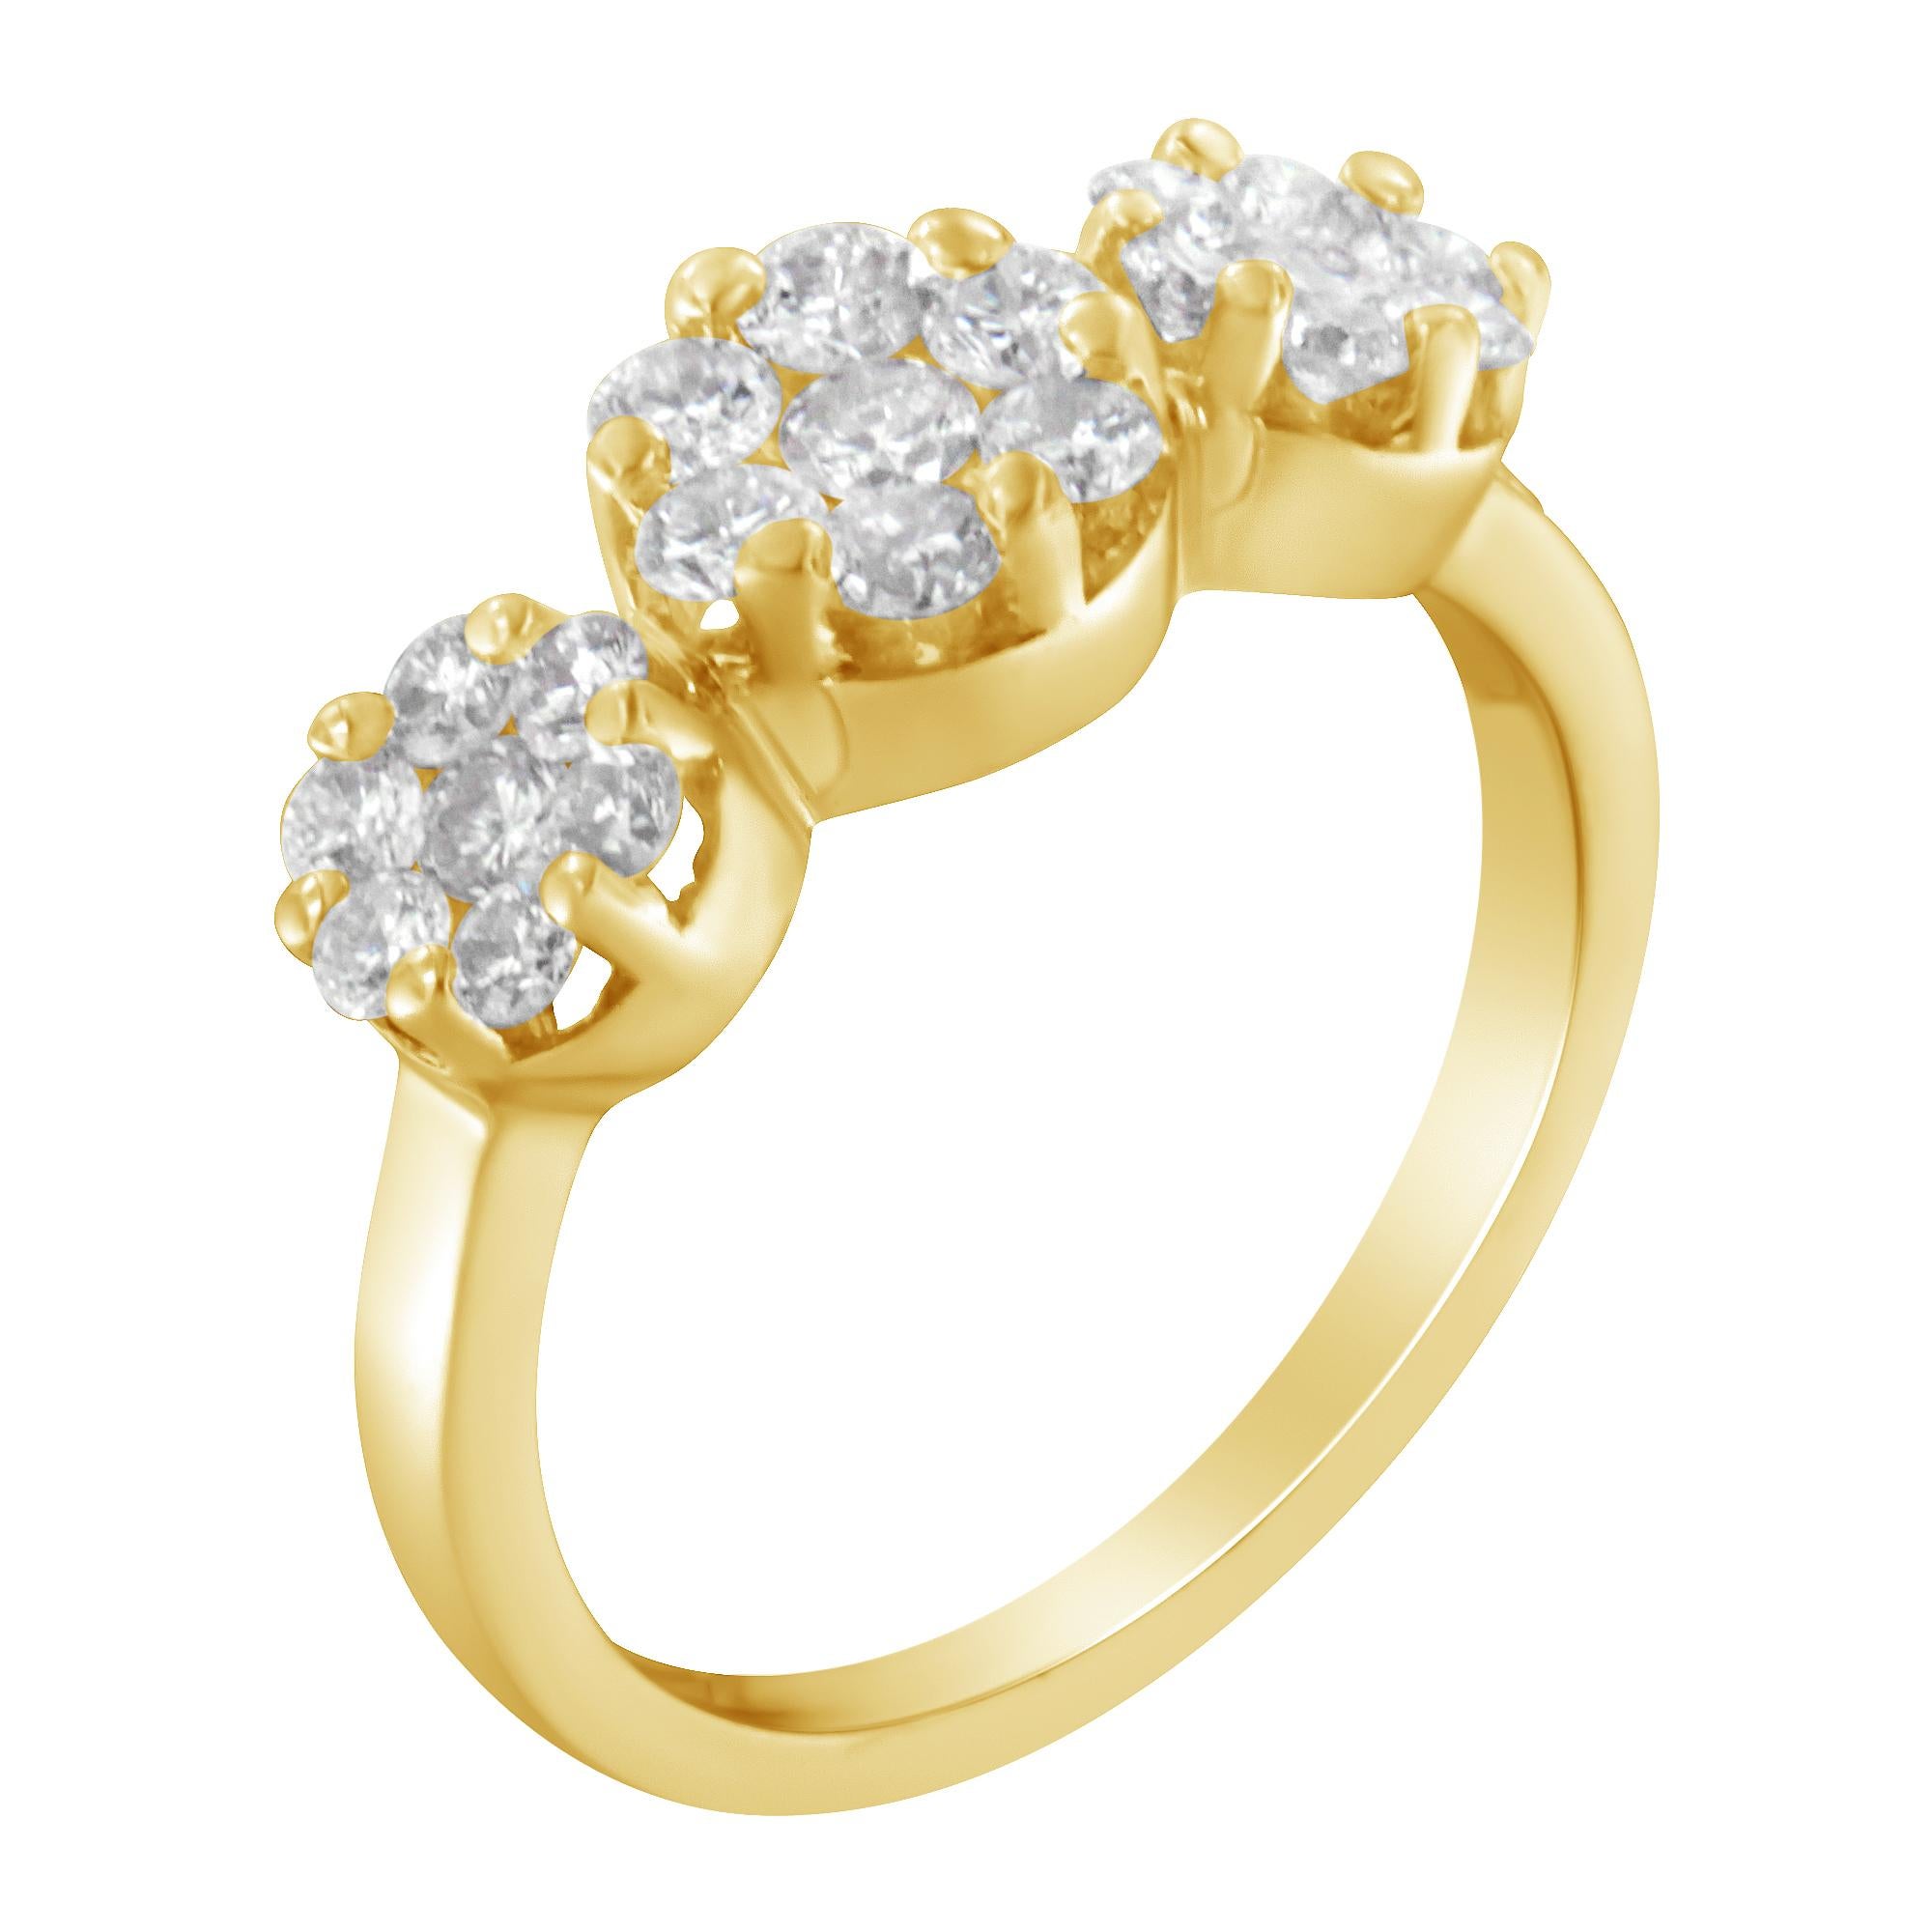 A diamond cluster ring that features three floral clusters of round diamonds. This delicate style is crafted in 14 karat yellow gold and has a total diamond weight of 1 1/4 carats. Product features:
Diamond Type: Natural White Diamond
Diamond Count: